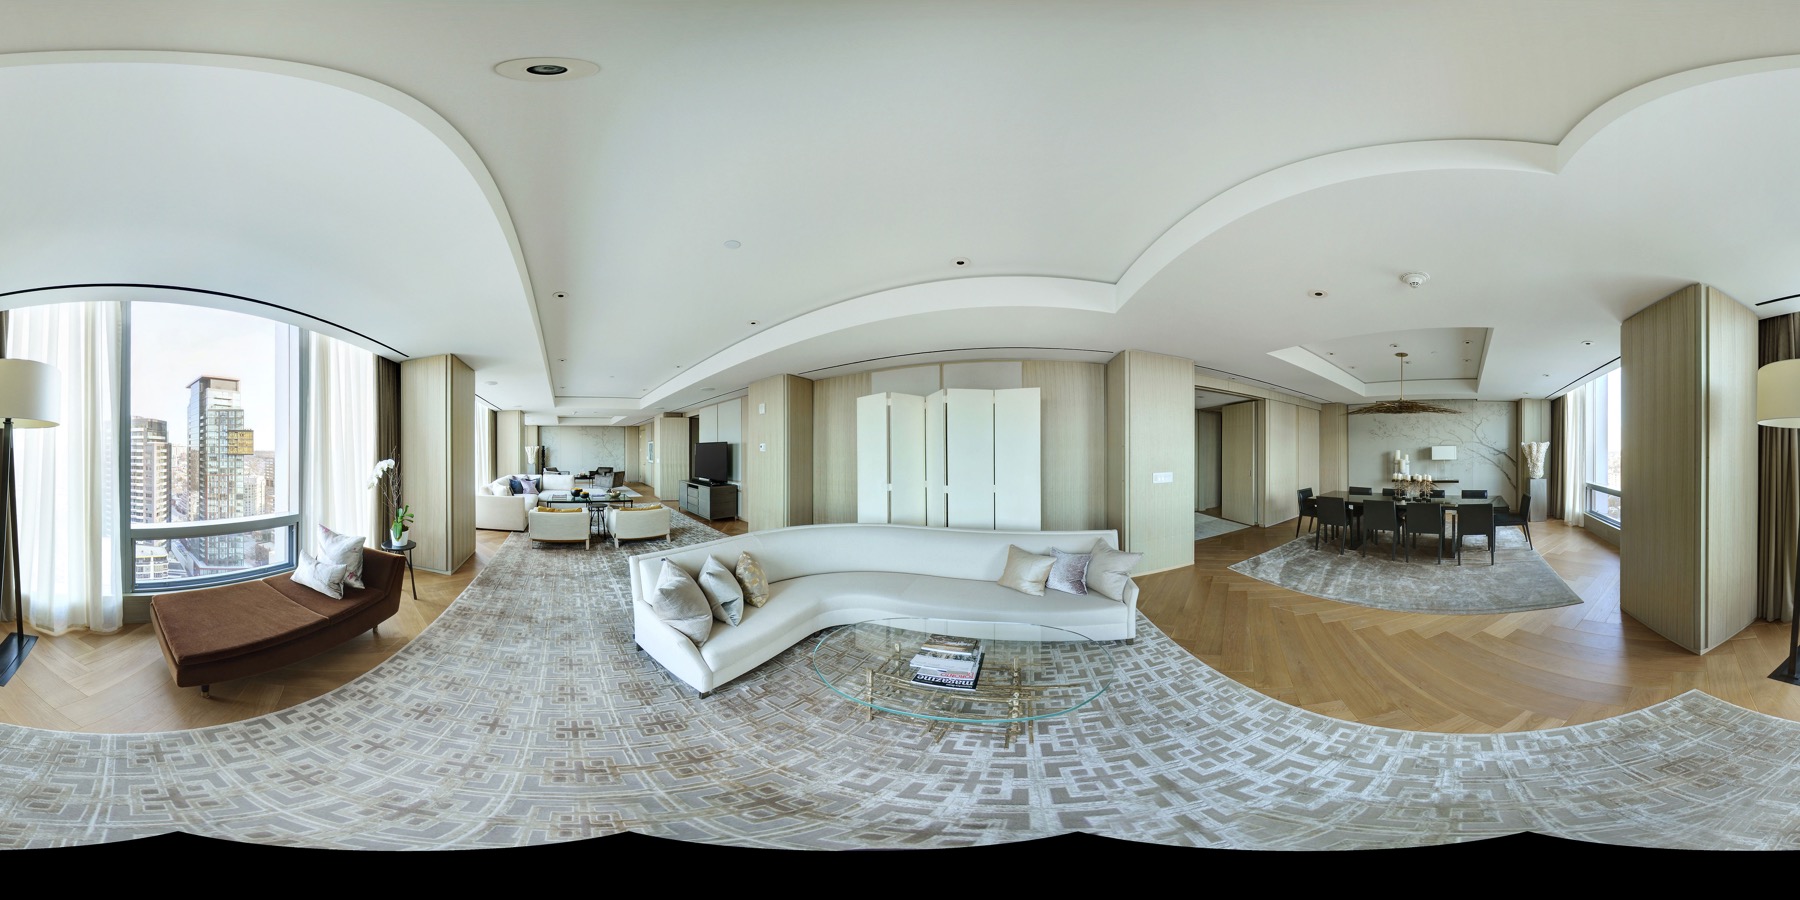 360 Photography: How to Photograph Interiors